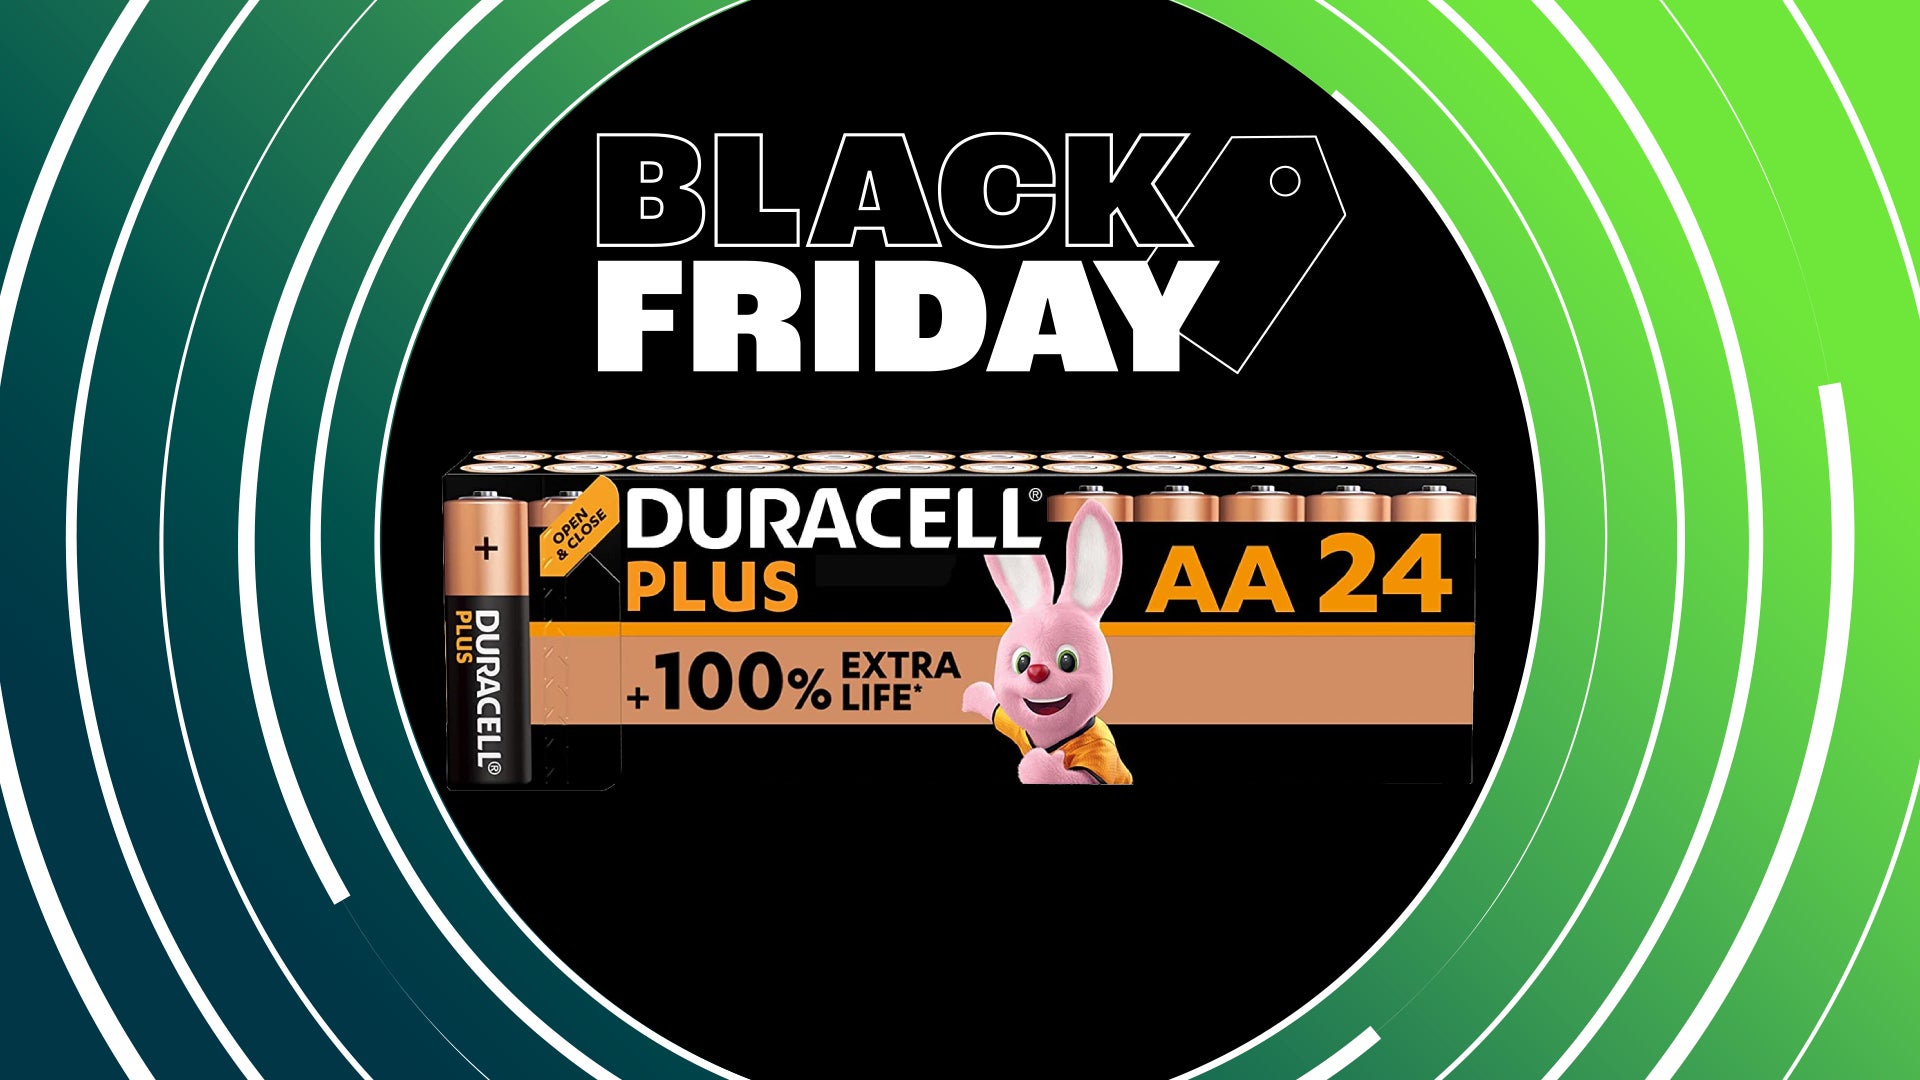 Image for Get 24 Duracell AA batteries for £13 at Amazon with this Black Friday discount.